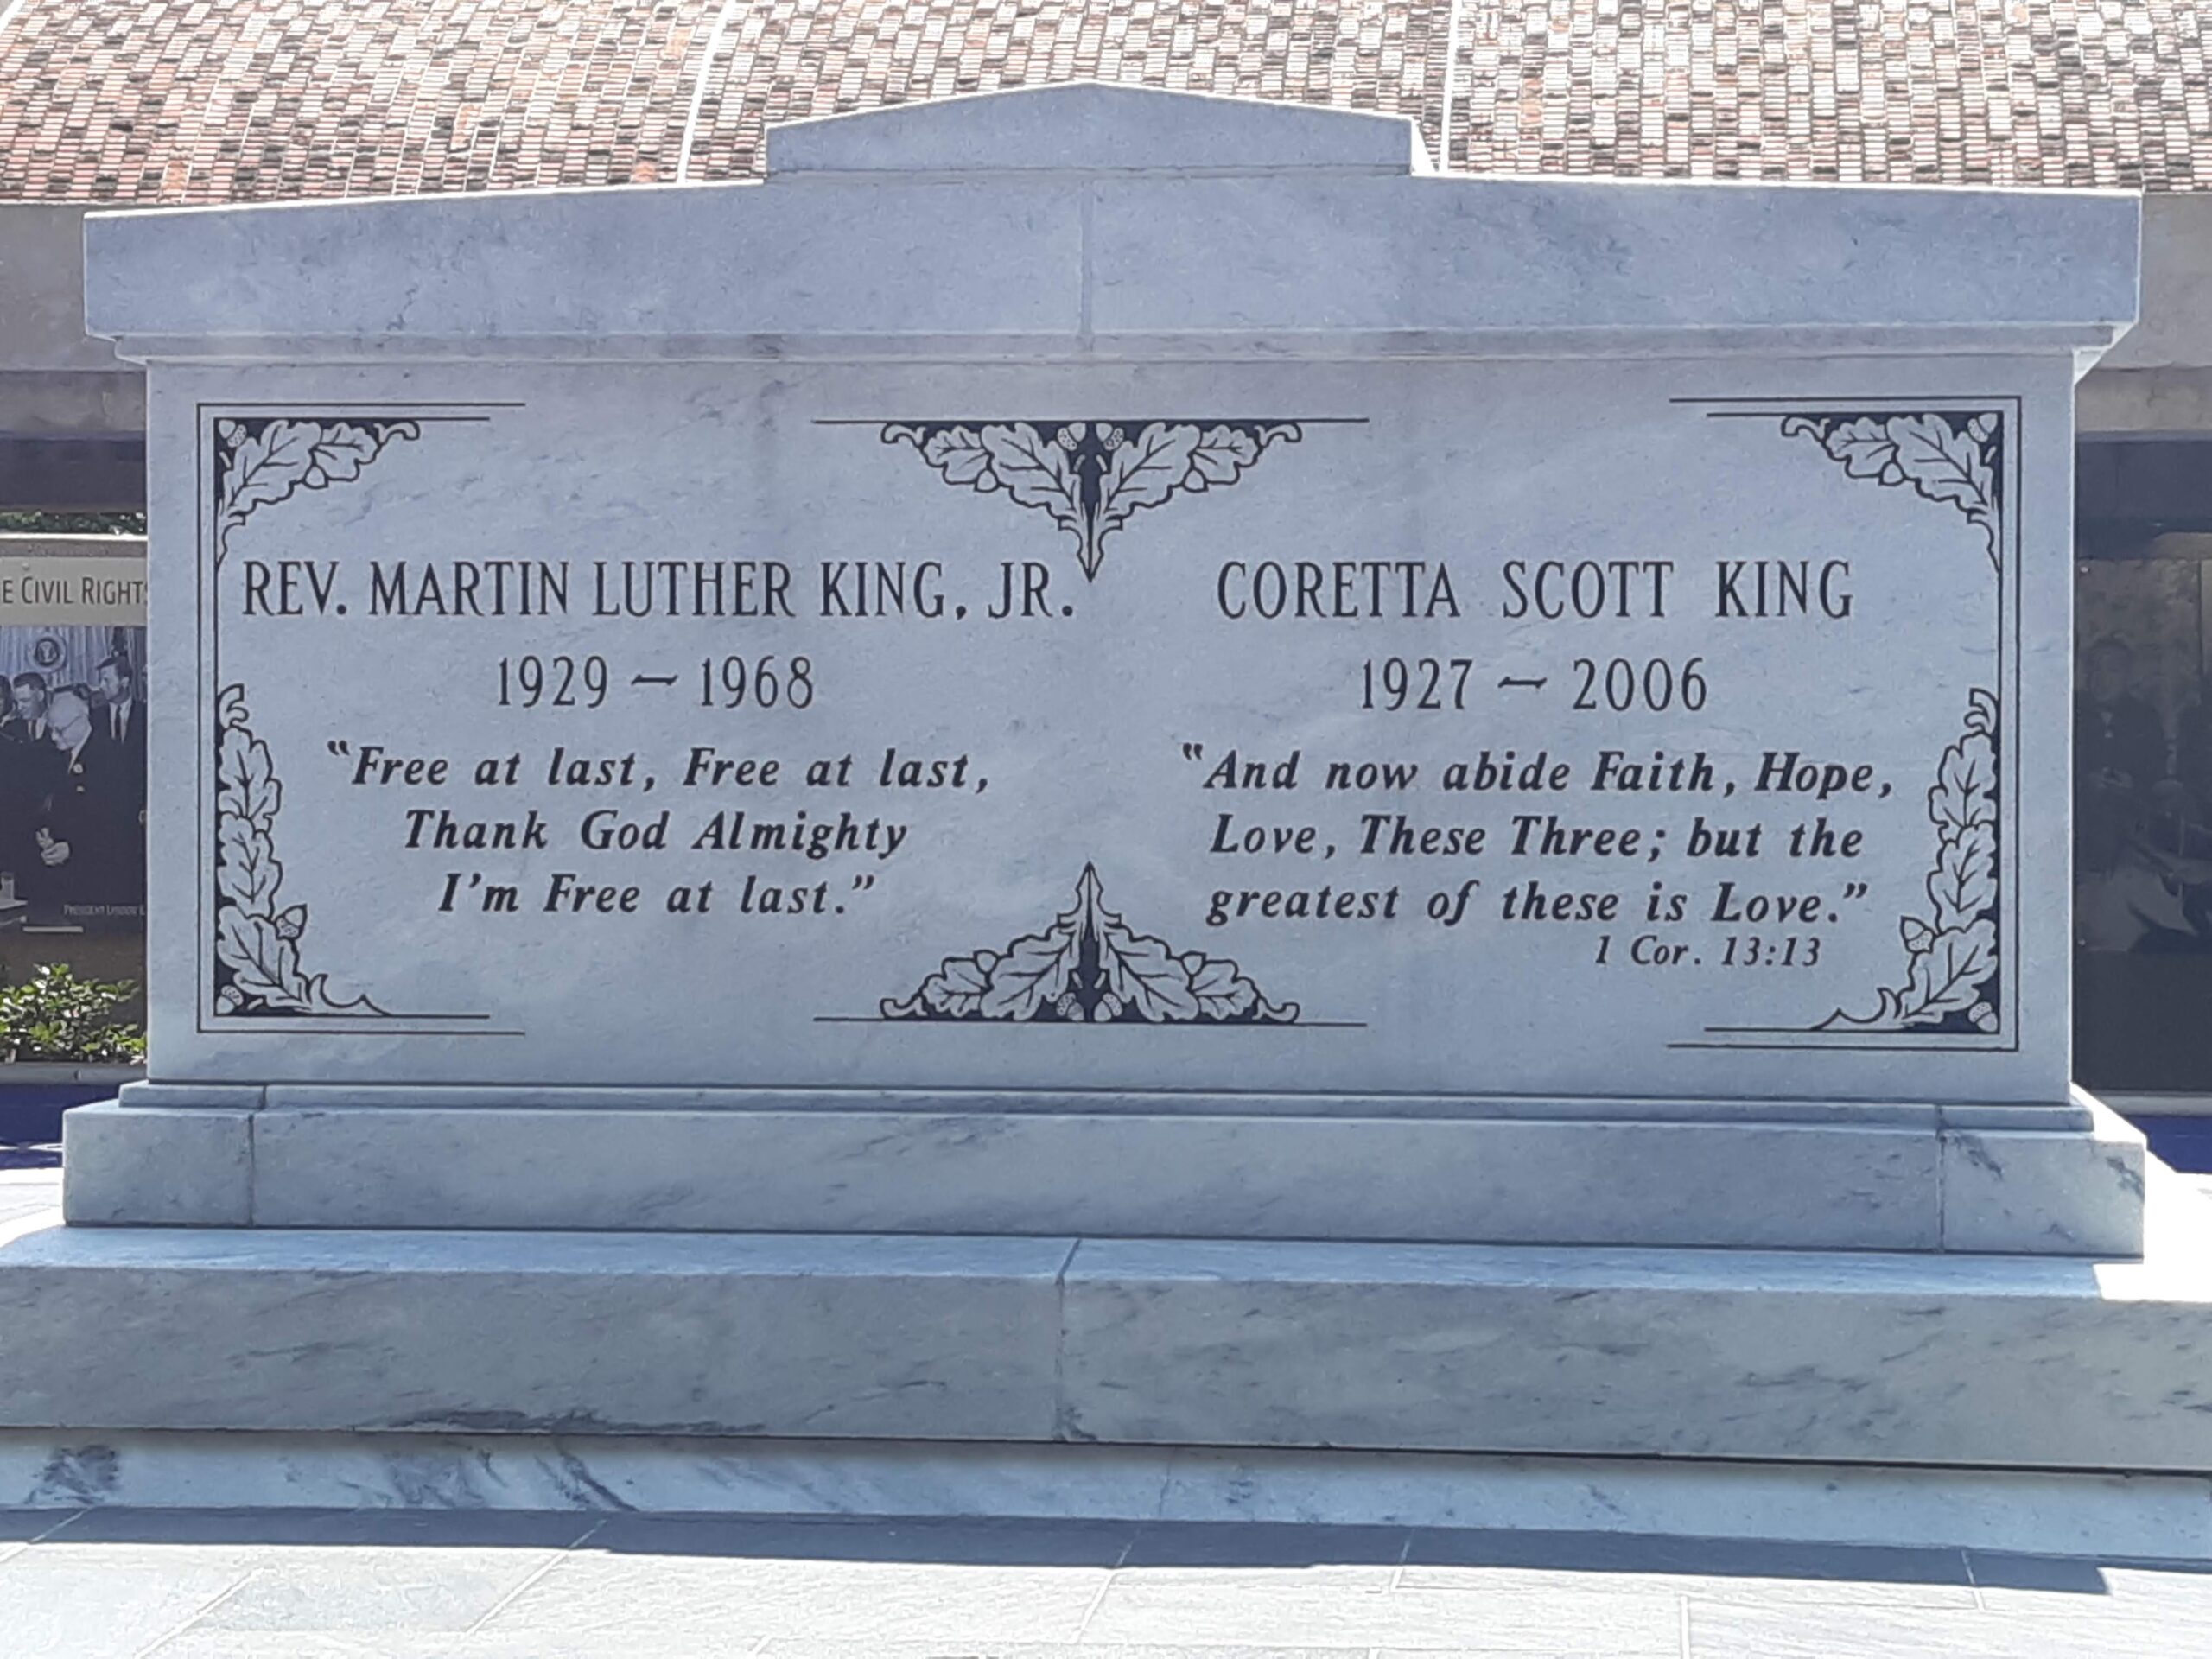 The graves of Dr. Martin Luther King Jr. and Coretta Scott King in Atlanta